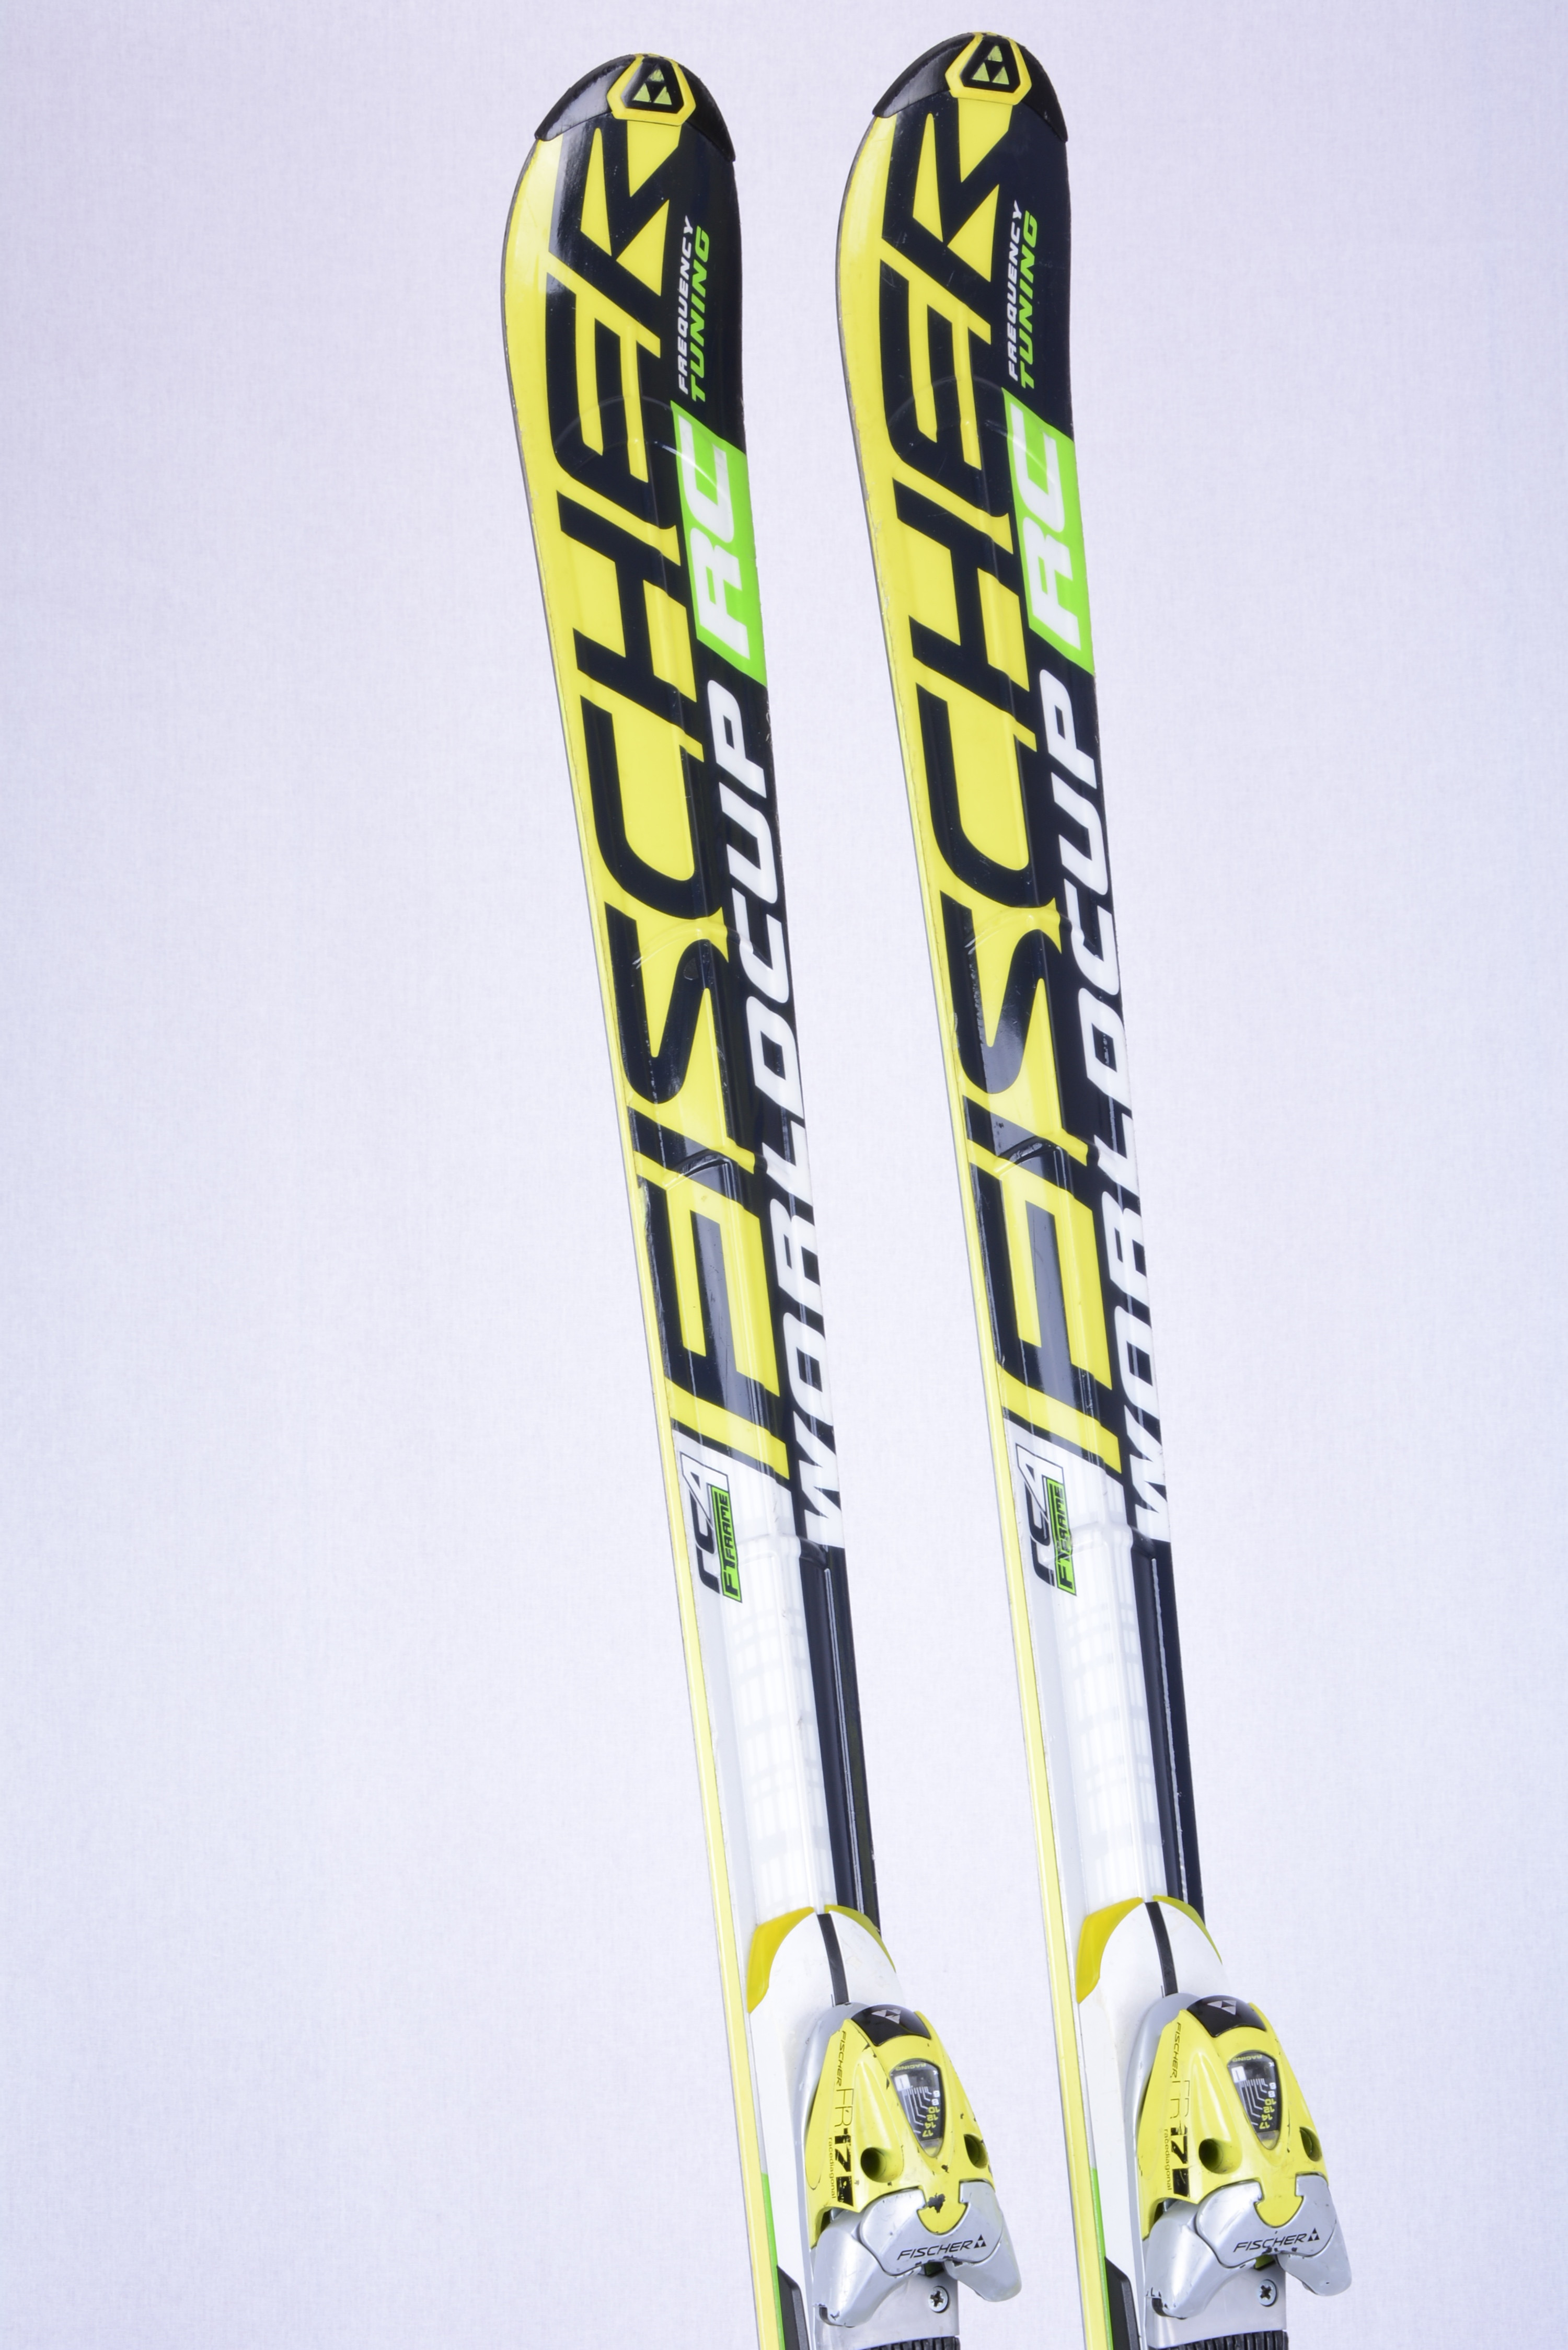 skis FISCHER RC4 WORLDCUP RC FREQUENCY TUNING, ft frame, aircarbon titanium  + Fischer FR 17